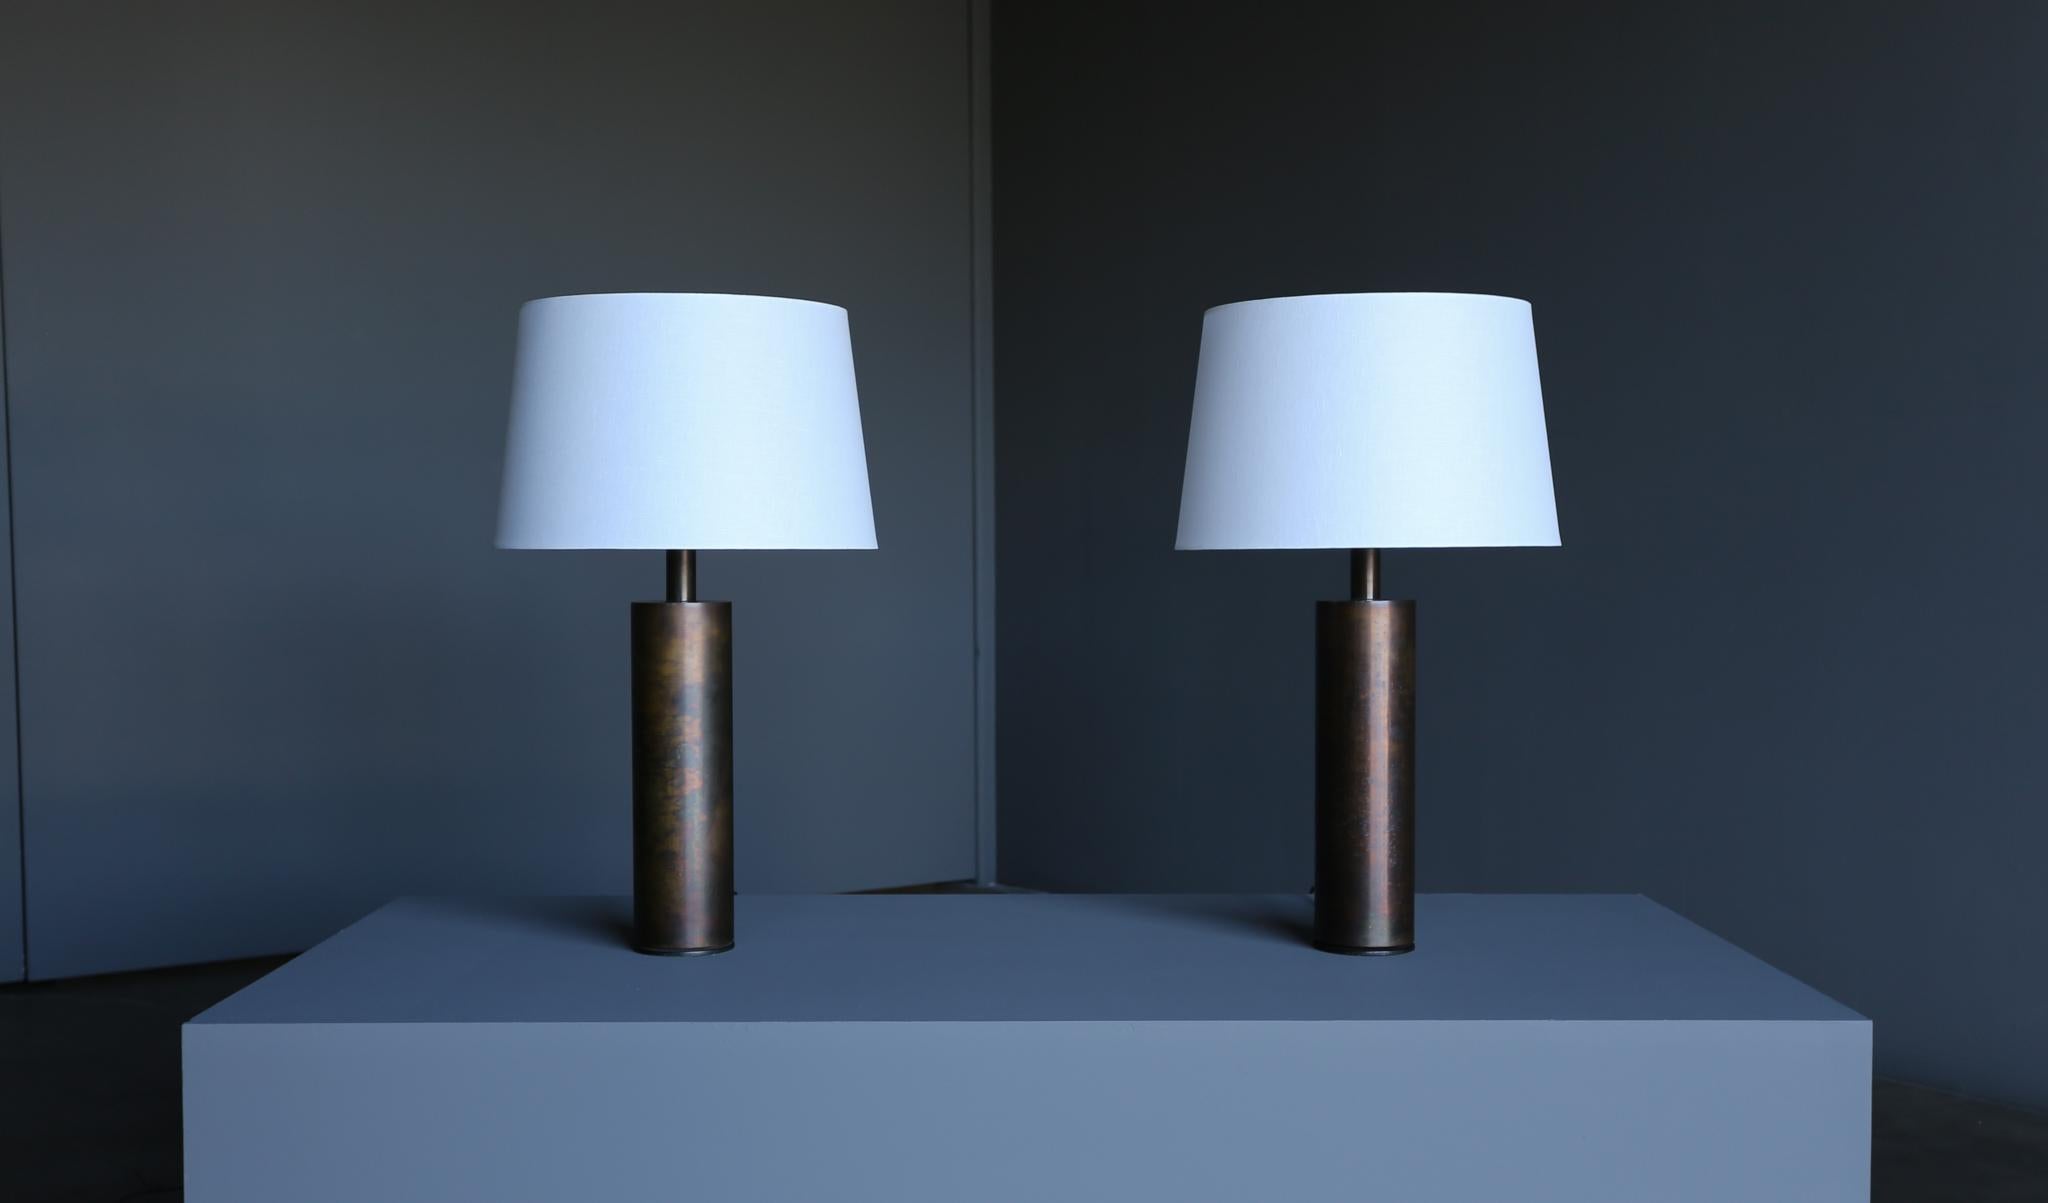 Stuart Barnes brass table lamps for Robert Long, circa 1970. This pair was handcrafted at the Robert Long studio in Sausalito, California. 

Each lamp measures: 

5